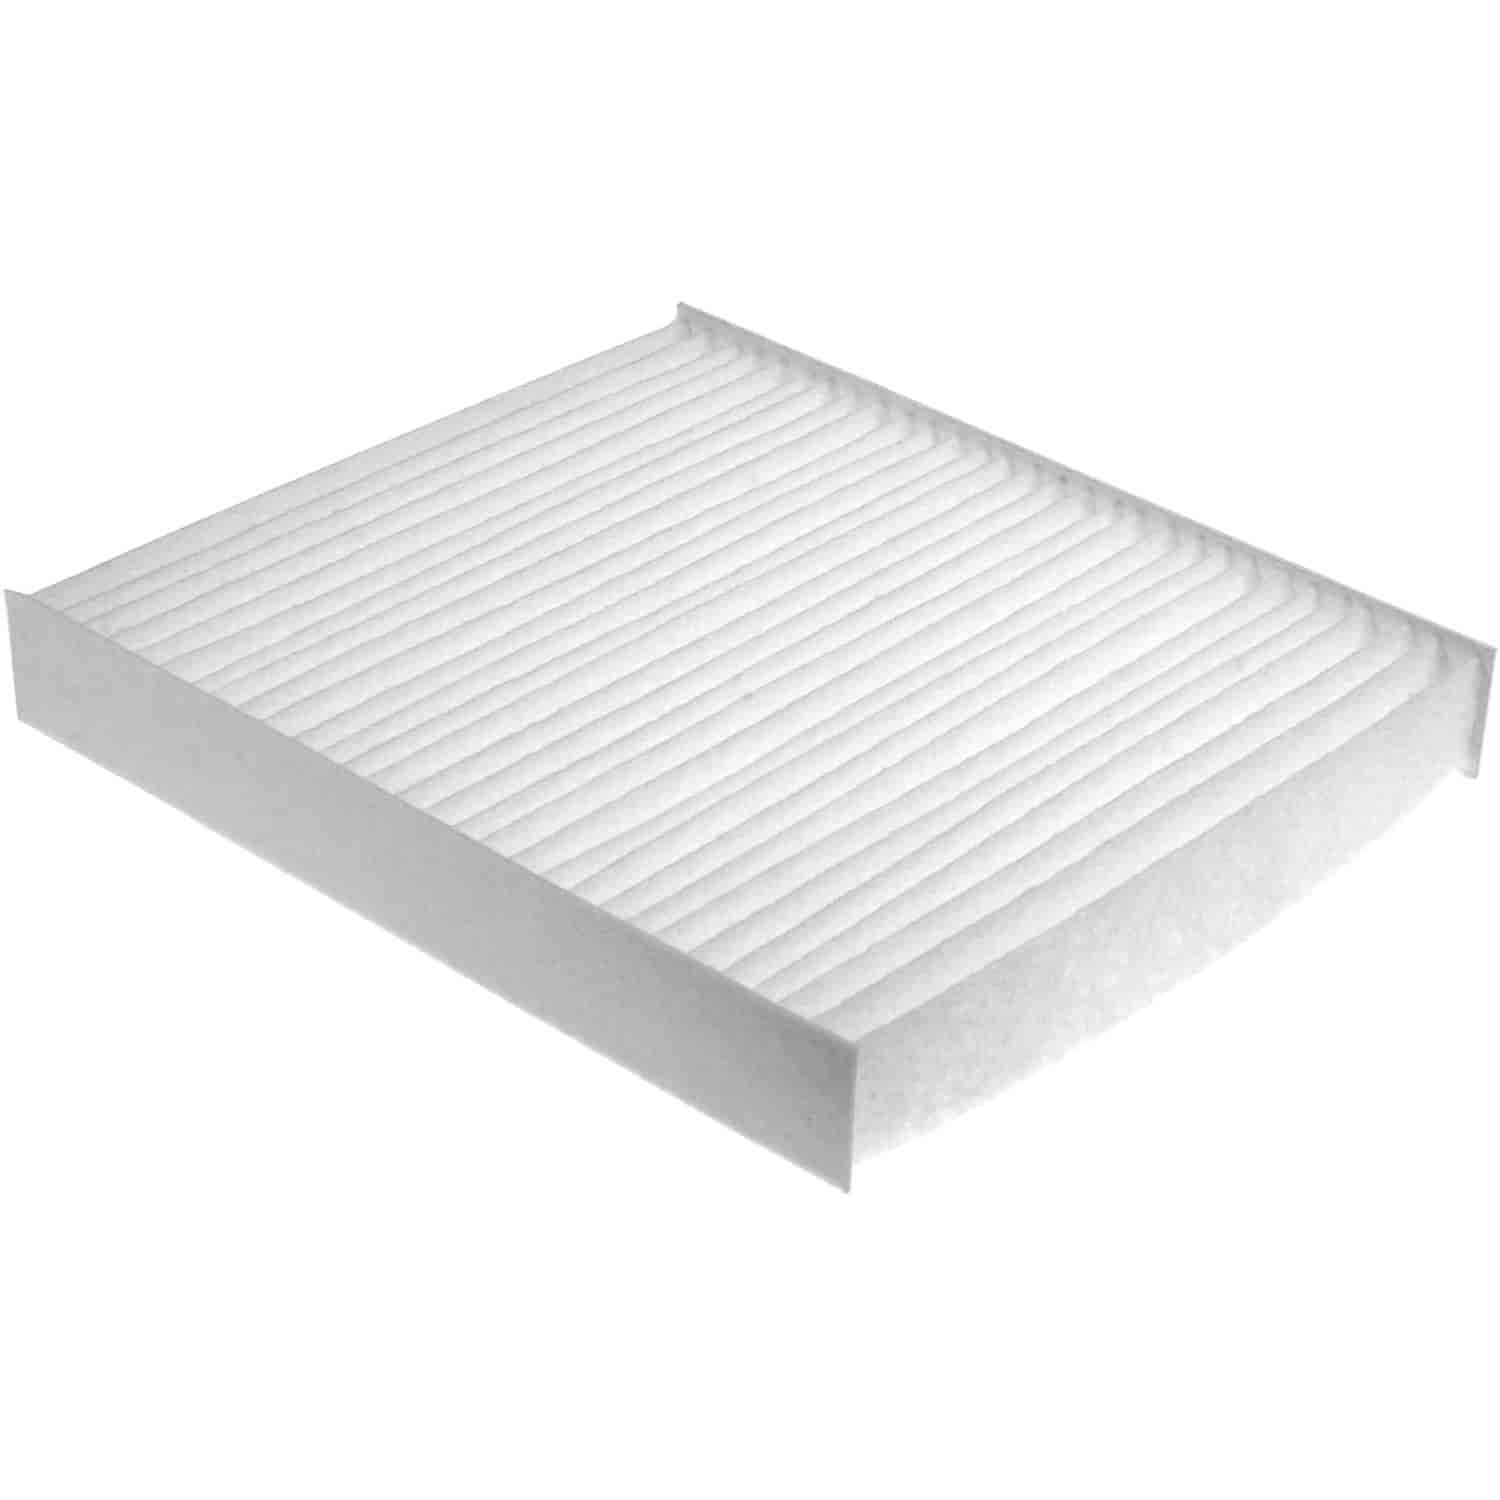 Mahle Cabin Air Filter for Kia Soul 1.6L